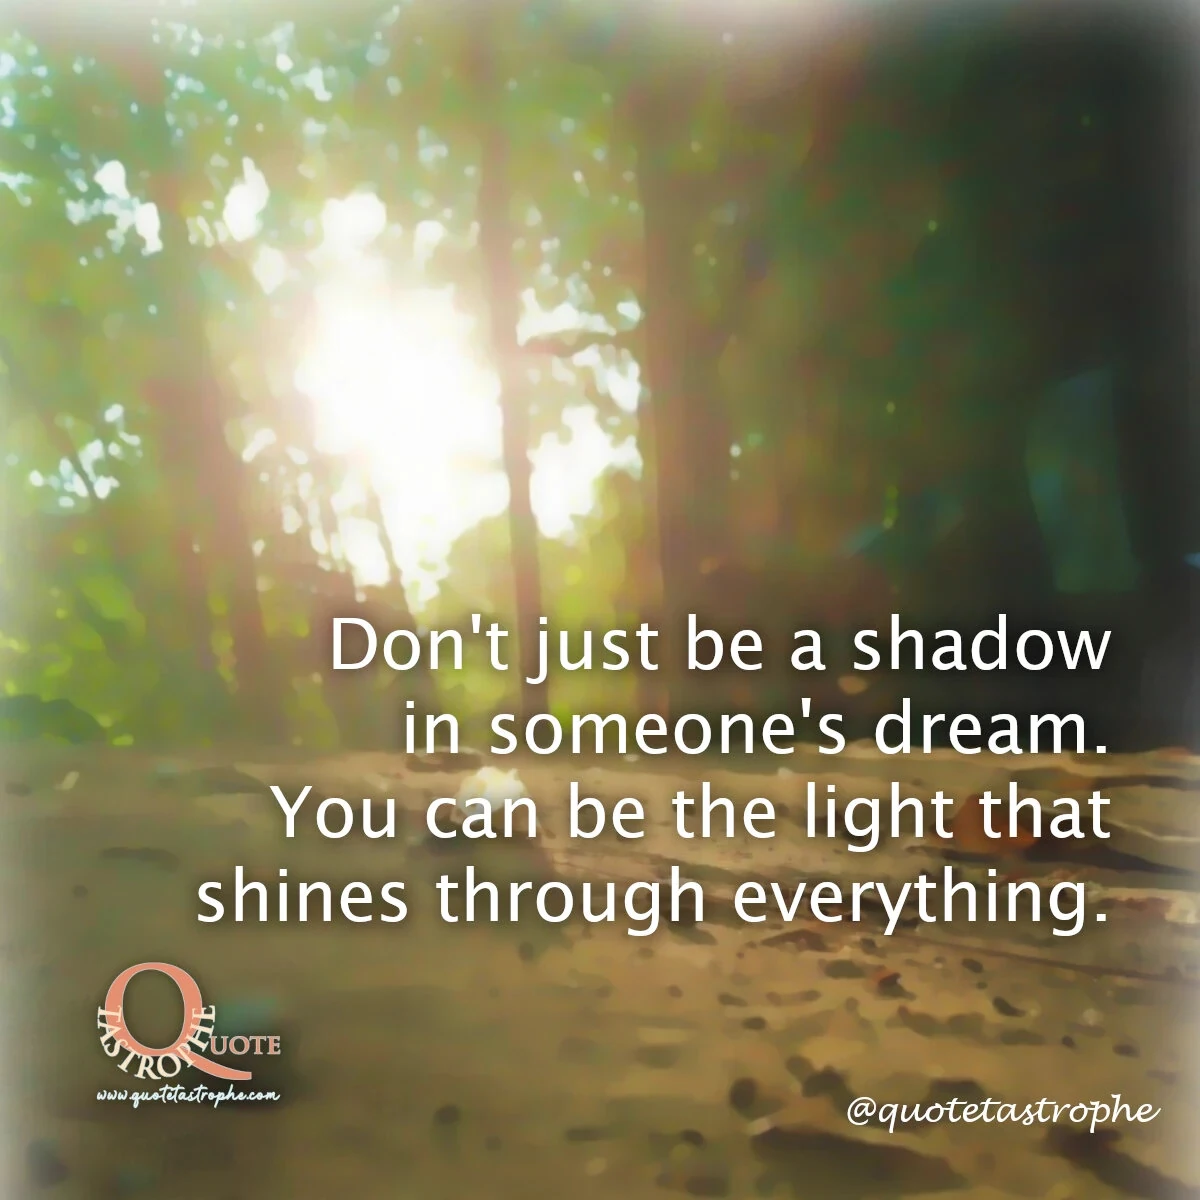 Don't Just be a Shadow in Someone's Dream